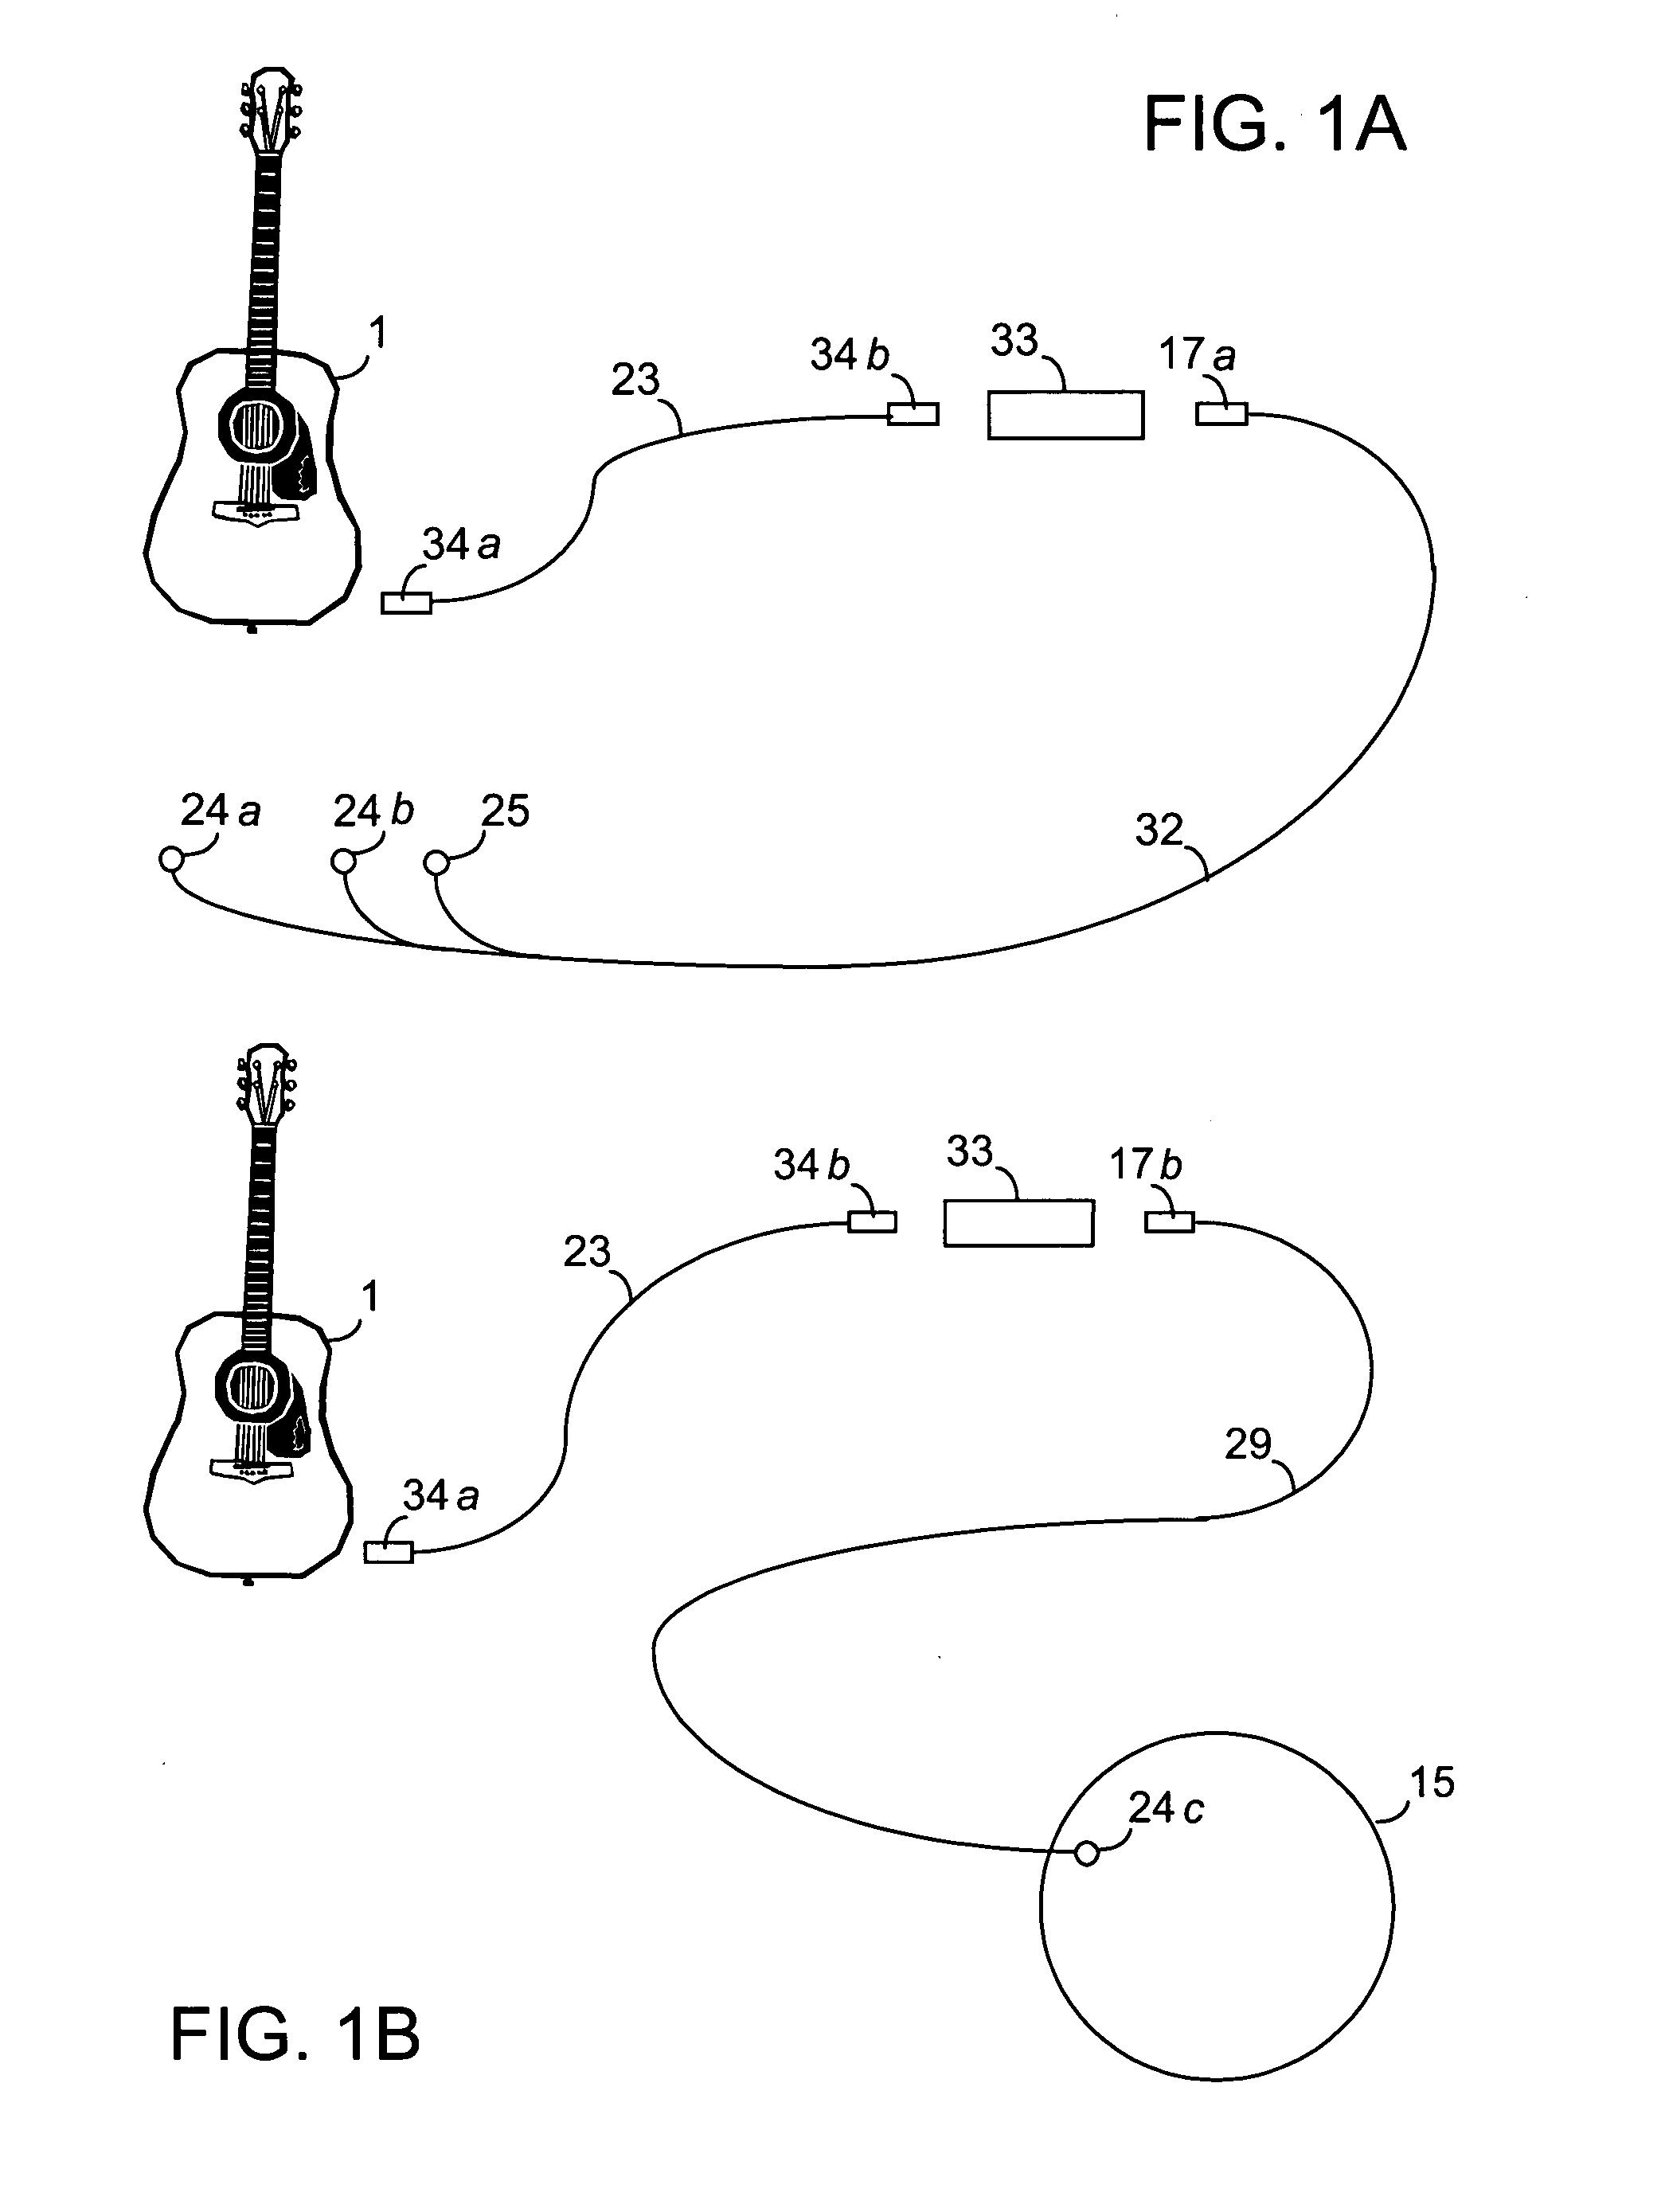 Musical instrument with system and methods for actuating designated accompaniment sounds